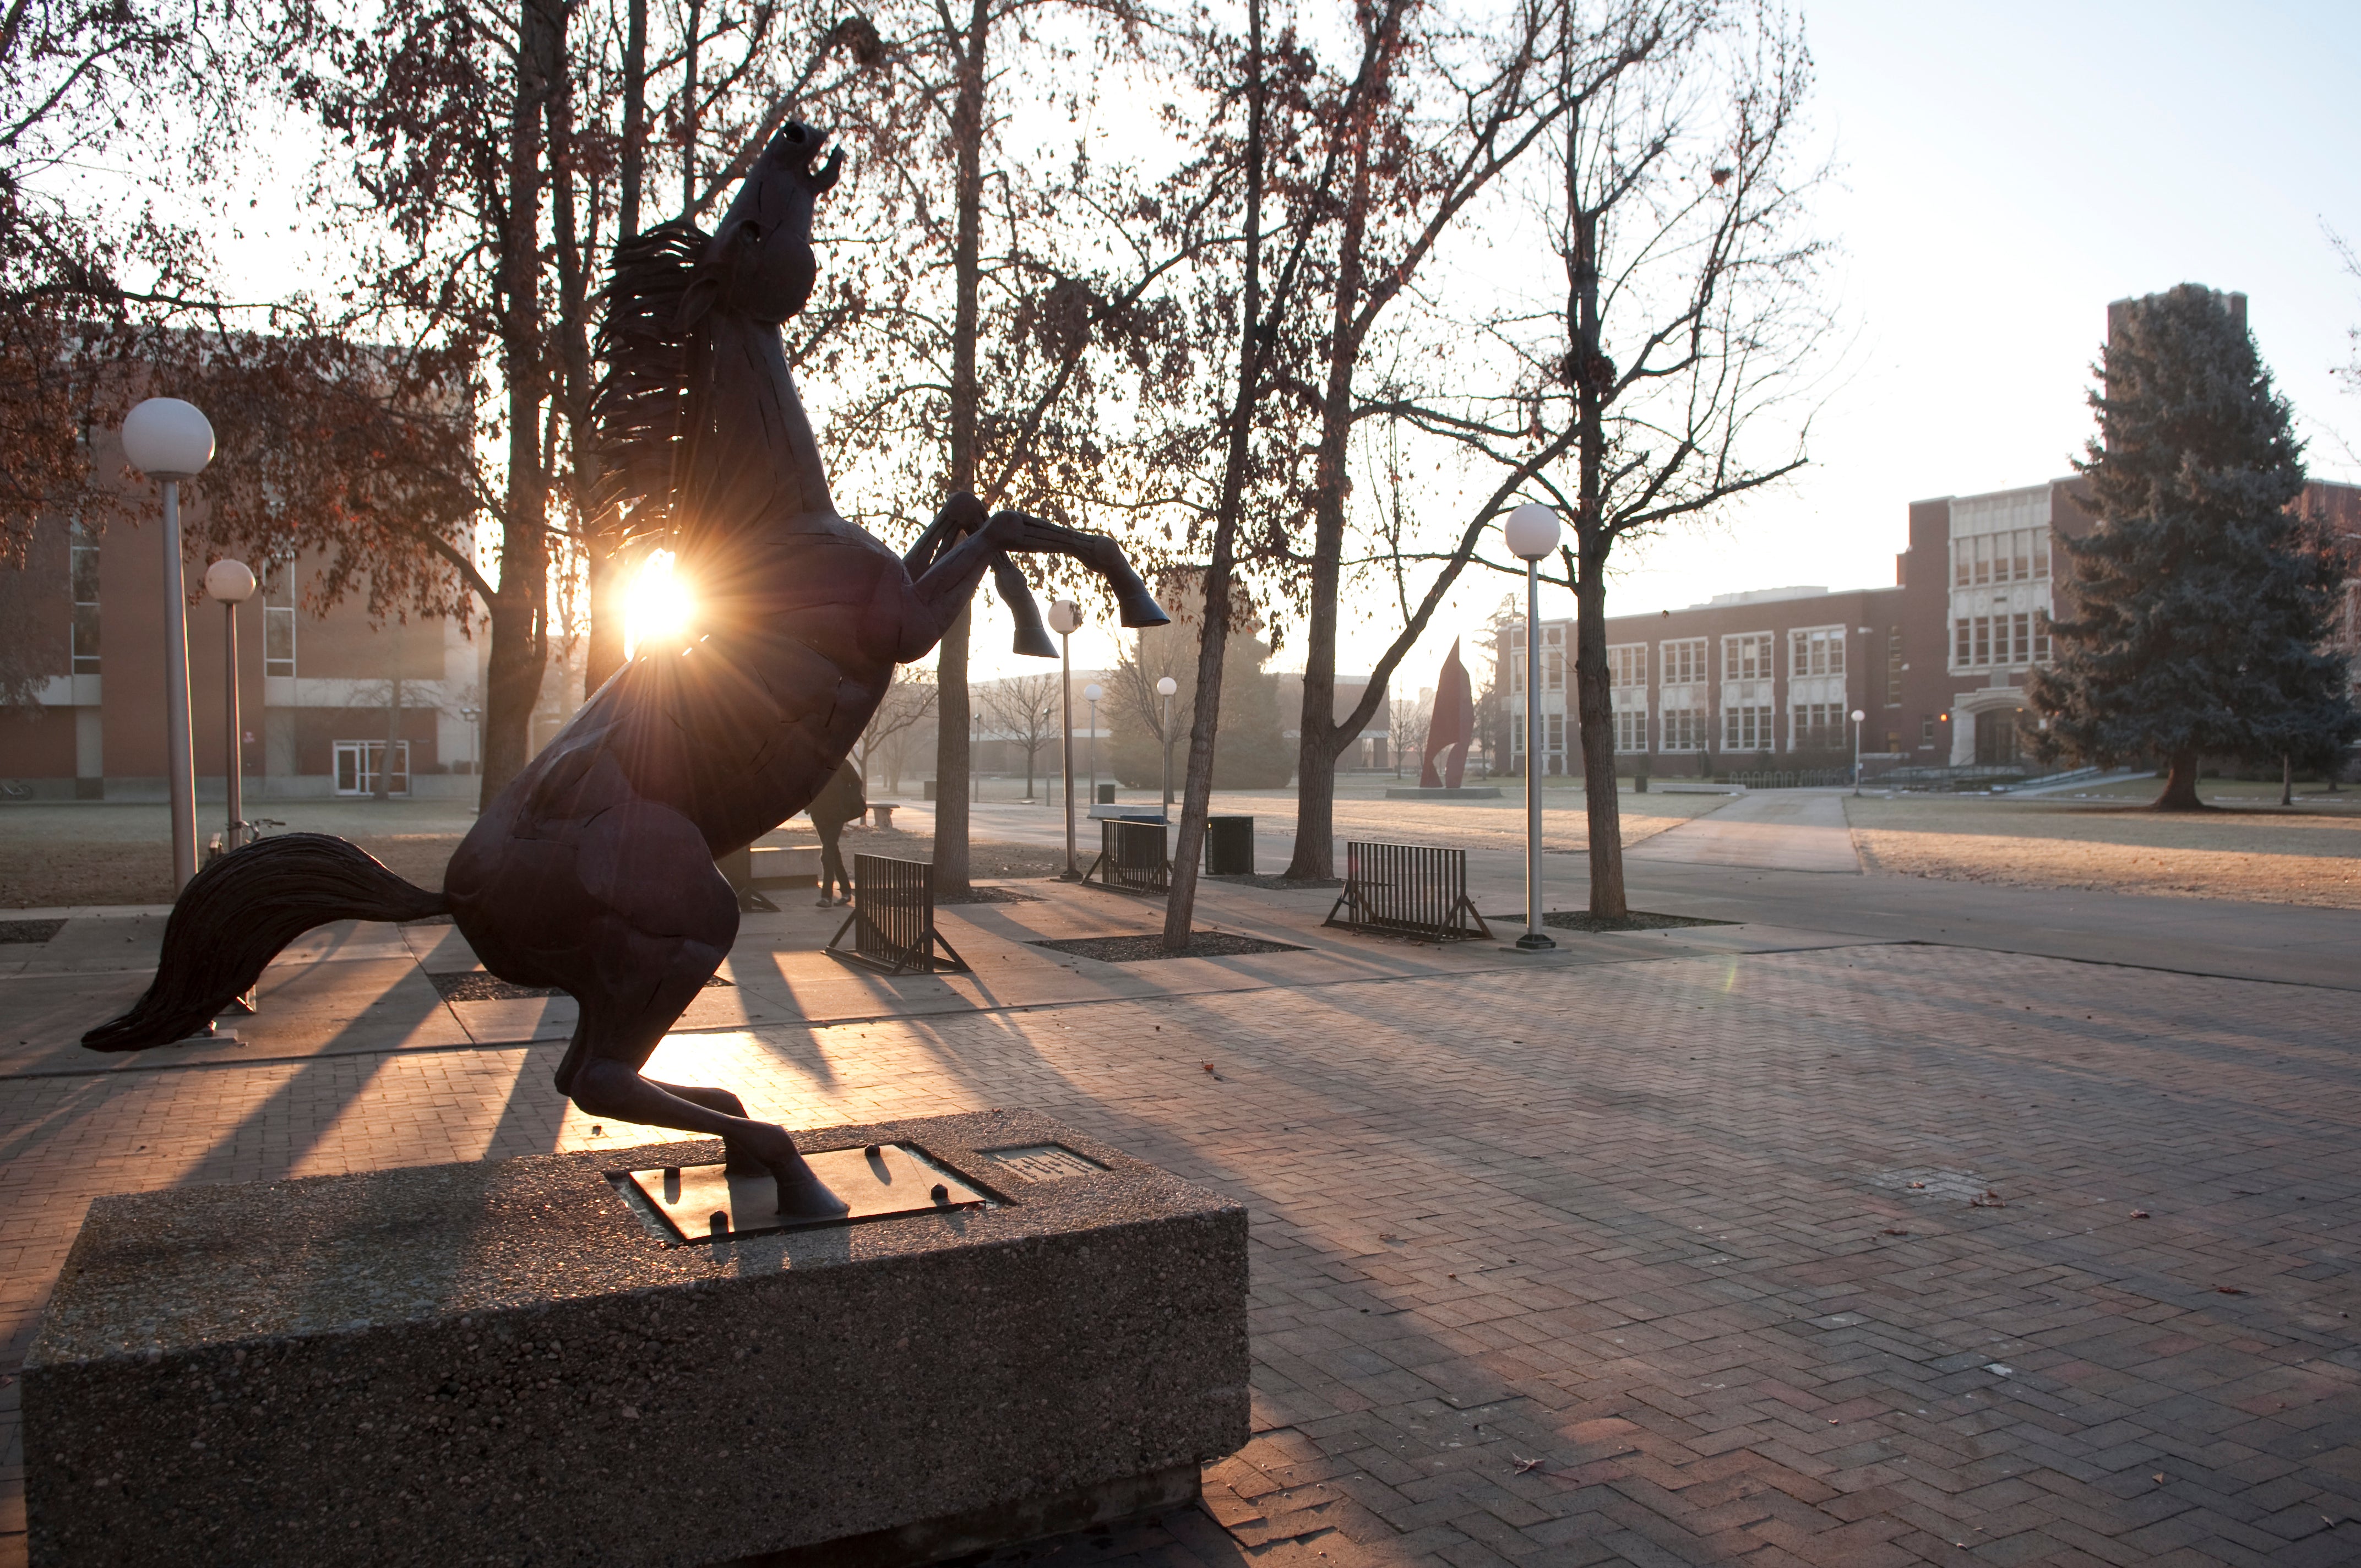 The sun illuminating a sculpture of bronco rising up on its back legs.